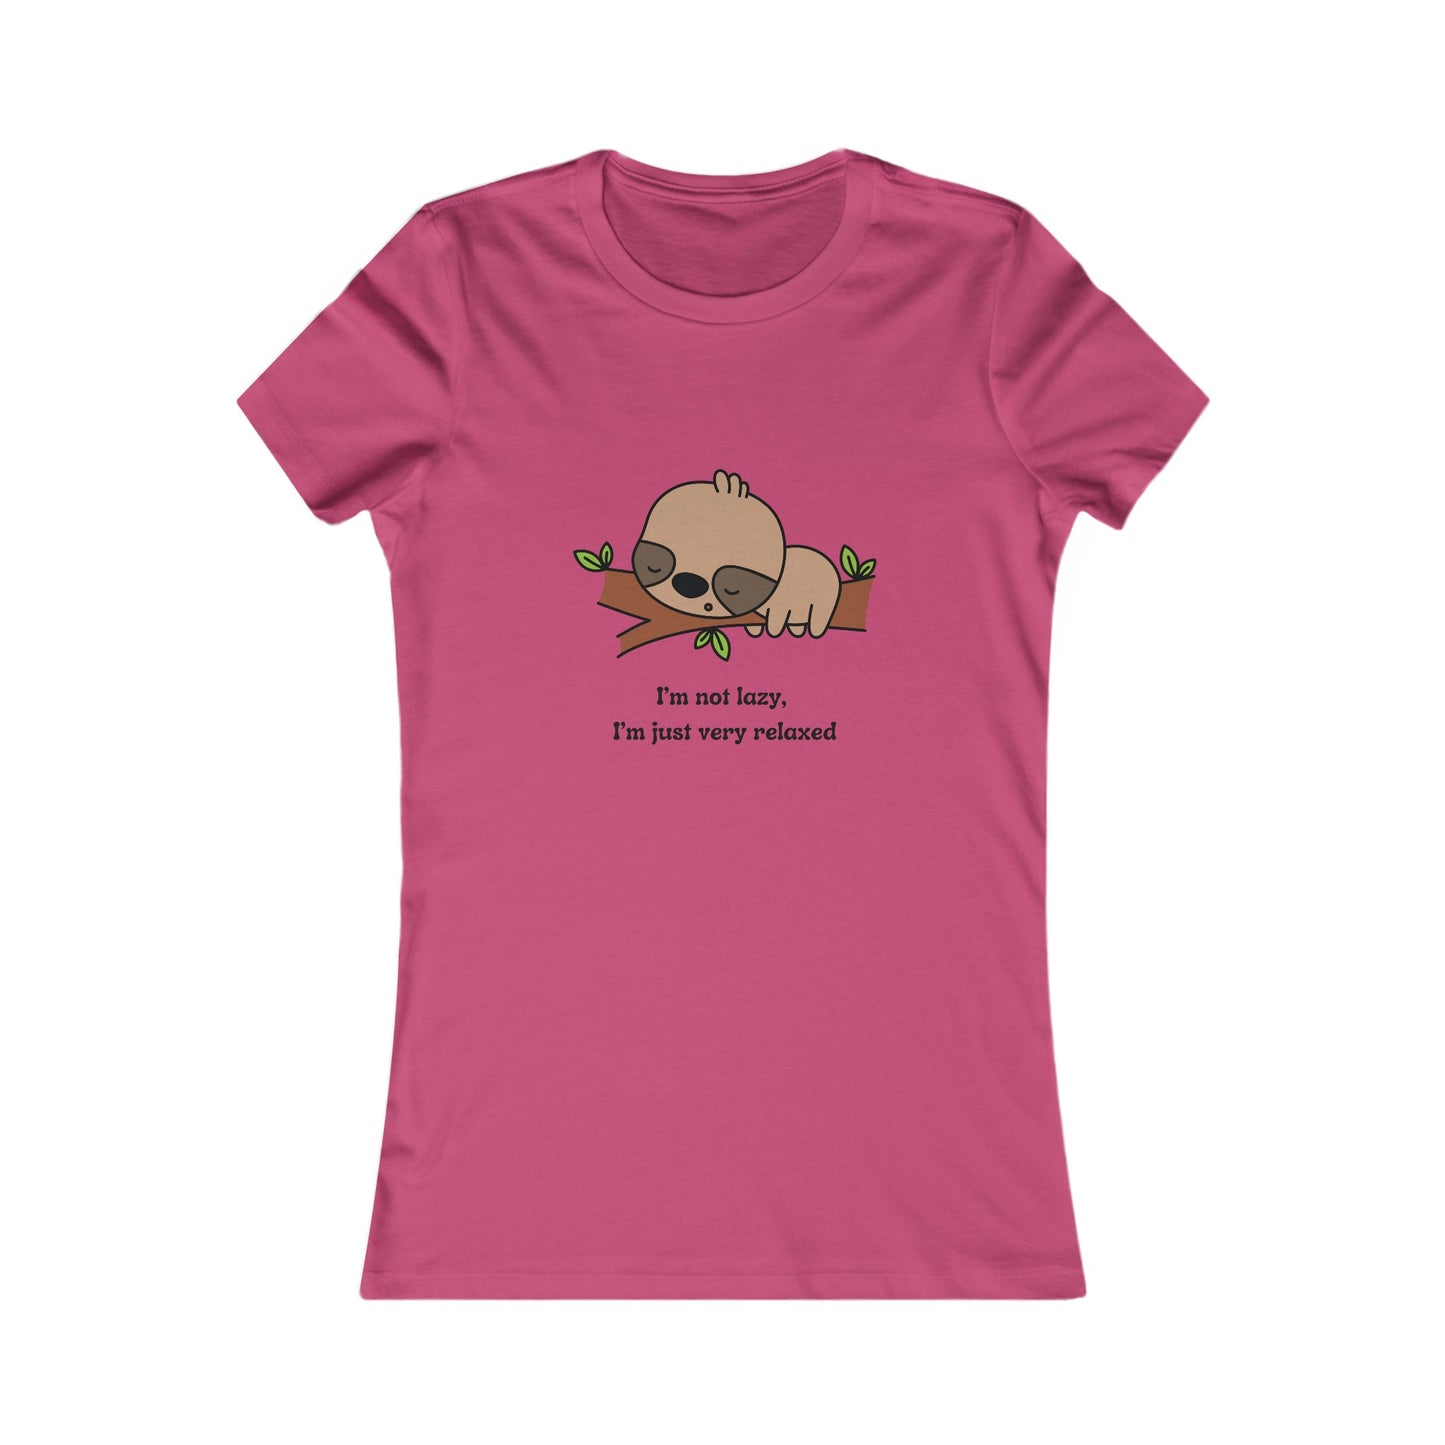 Sloth, Women's Favorite Tee, T-shirt, I'm Not Lazy I'm Just Really Relaxed, Animals, Anime,